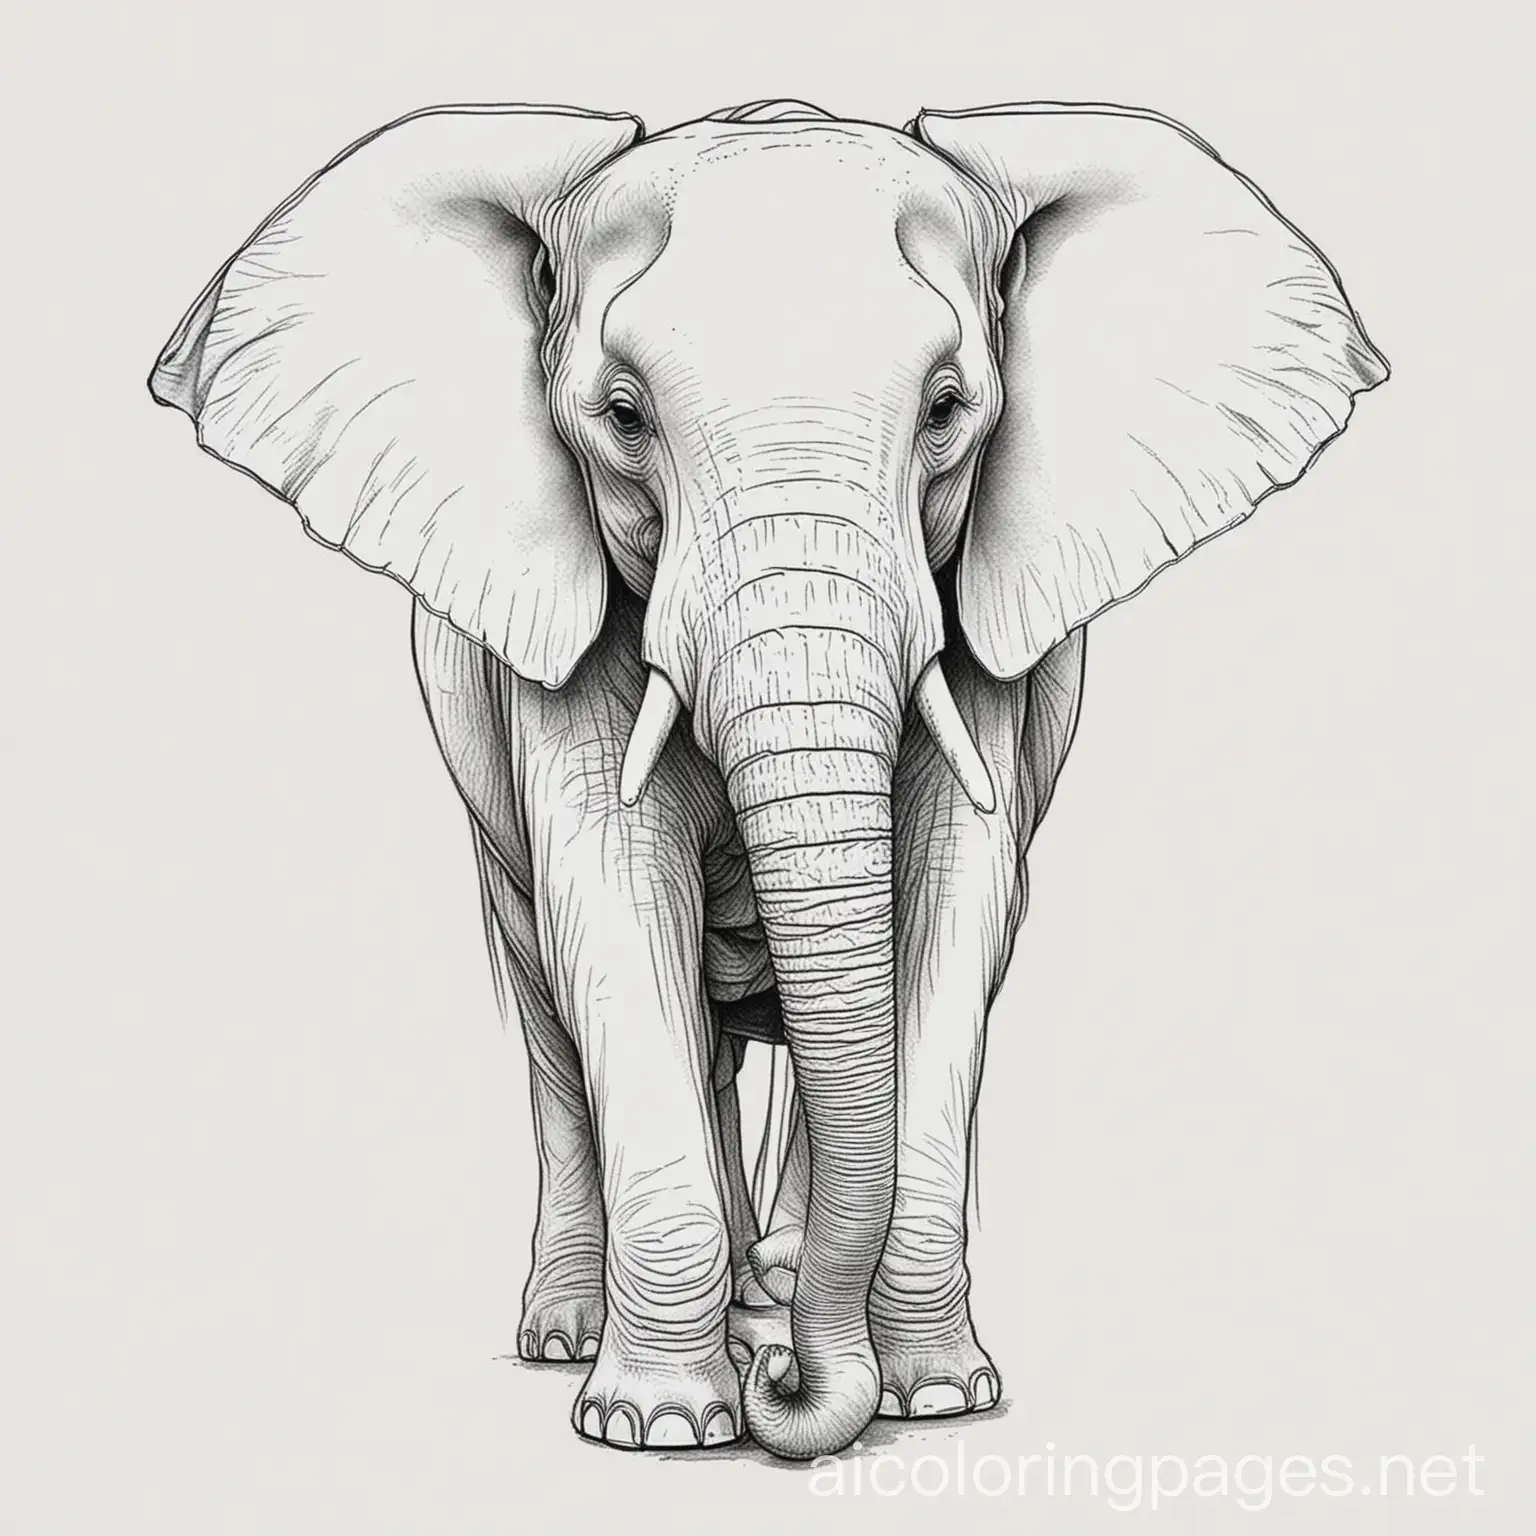 an elephant, Coloring Page, black and white, line art, white background, Simplicity, Ample White Space. The background of the coloring page is plain white to make it easy for young children to color within the lines. The outlines of all the subjects are easy to distinguish, making it simple for kids to color without too much difficulty